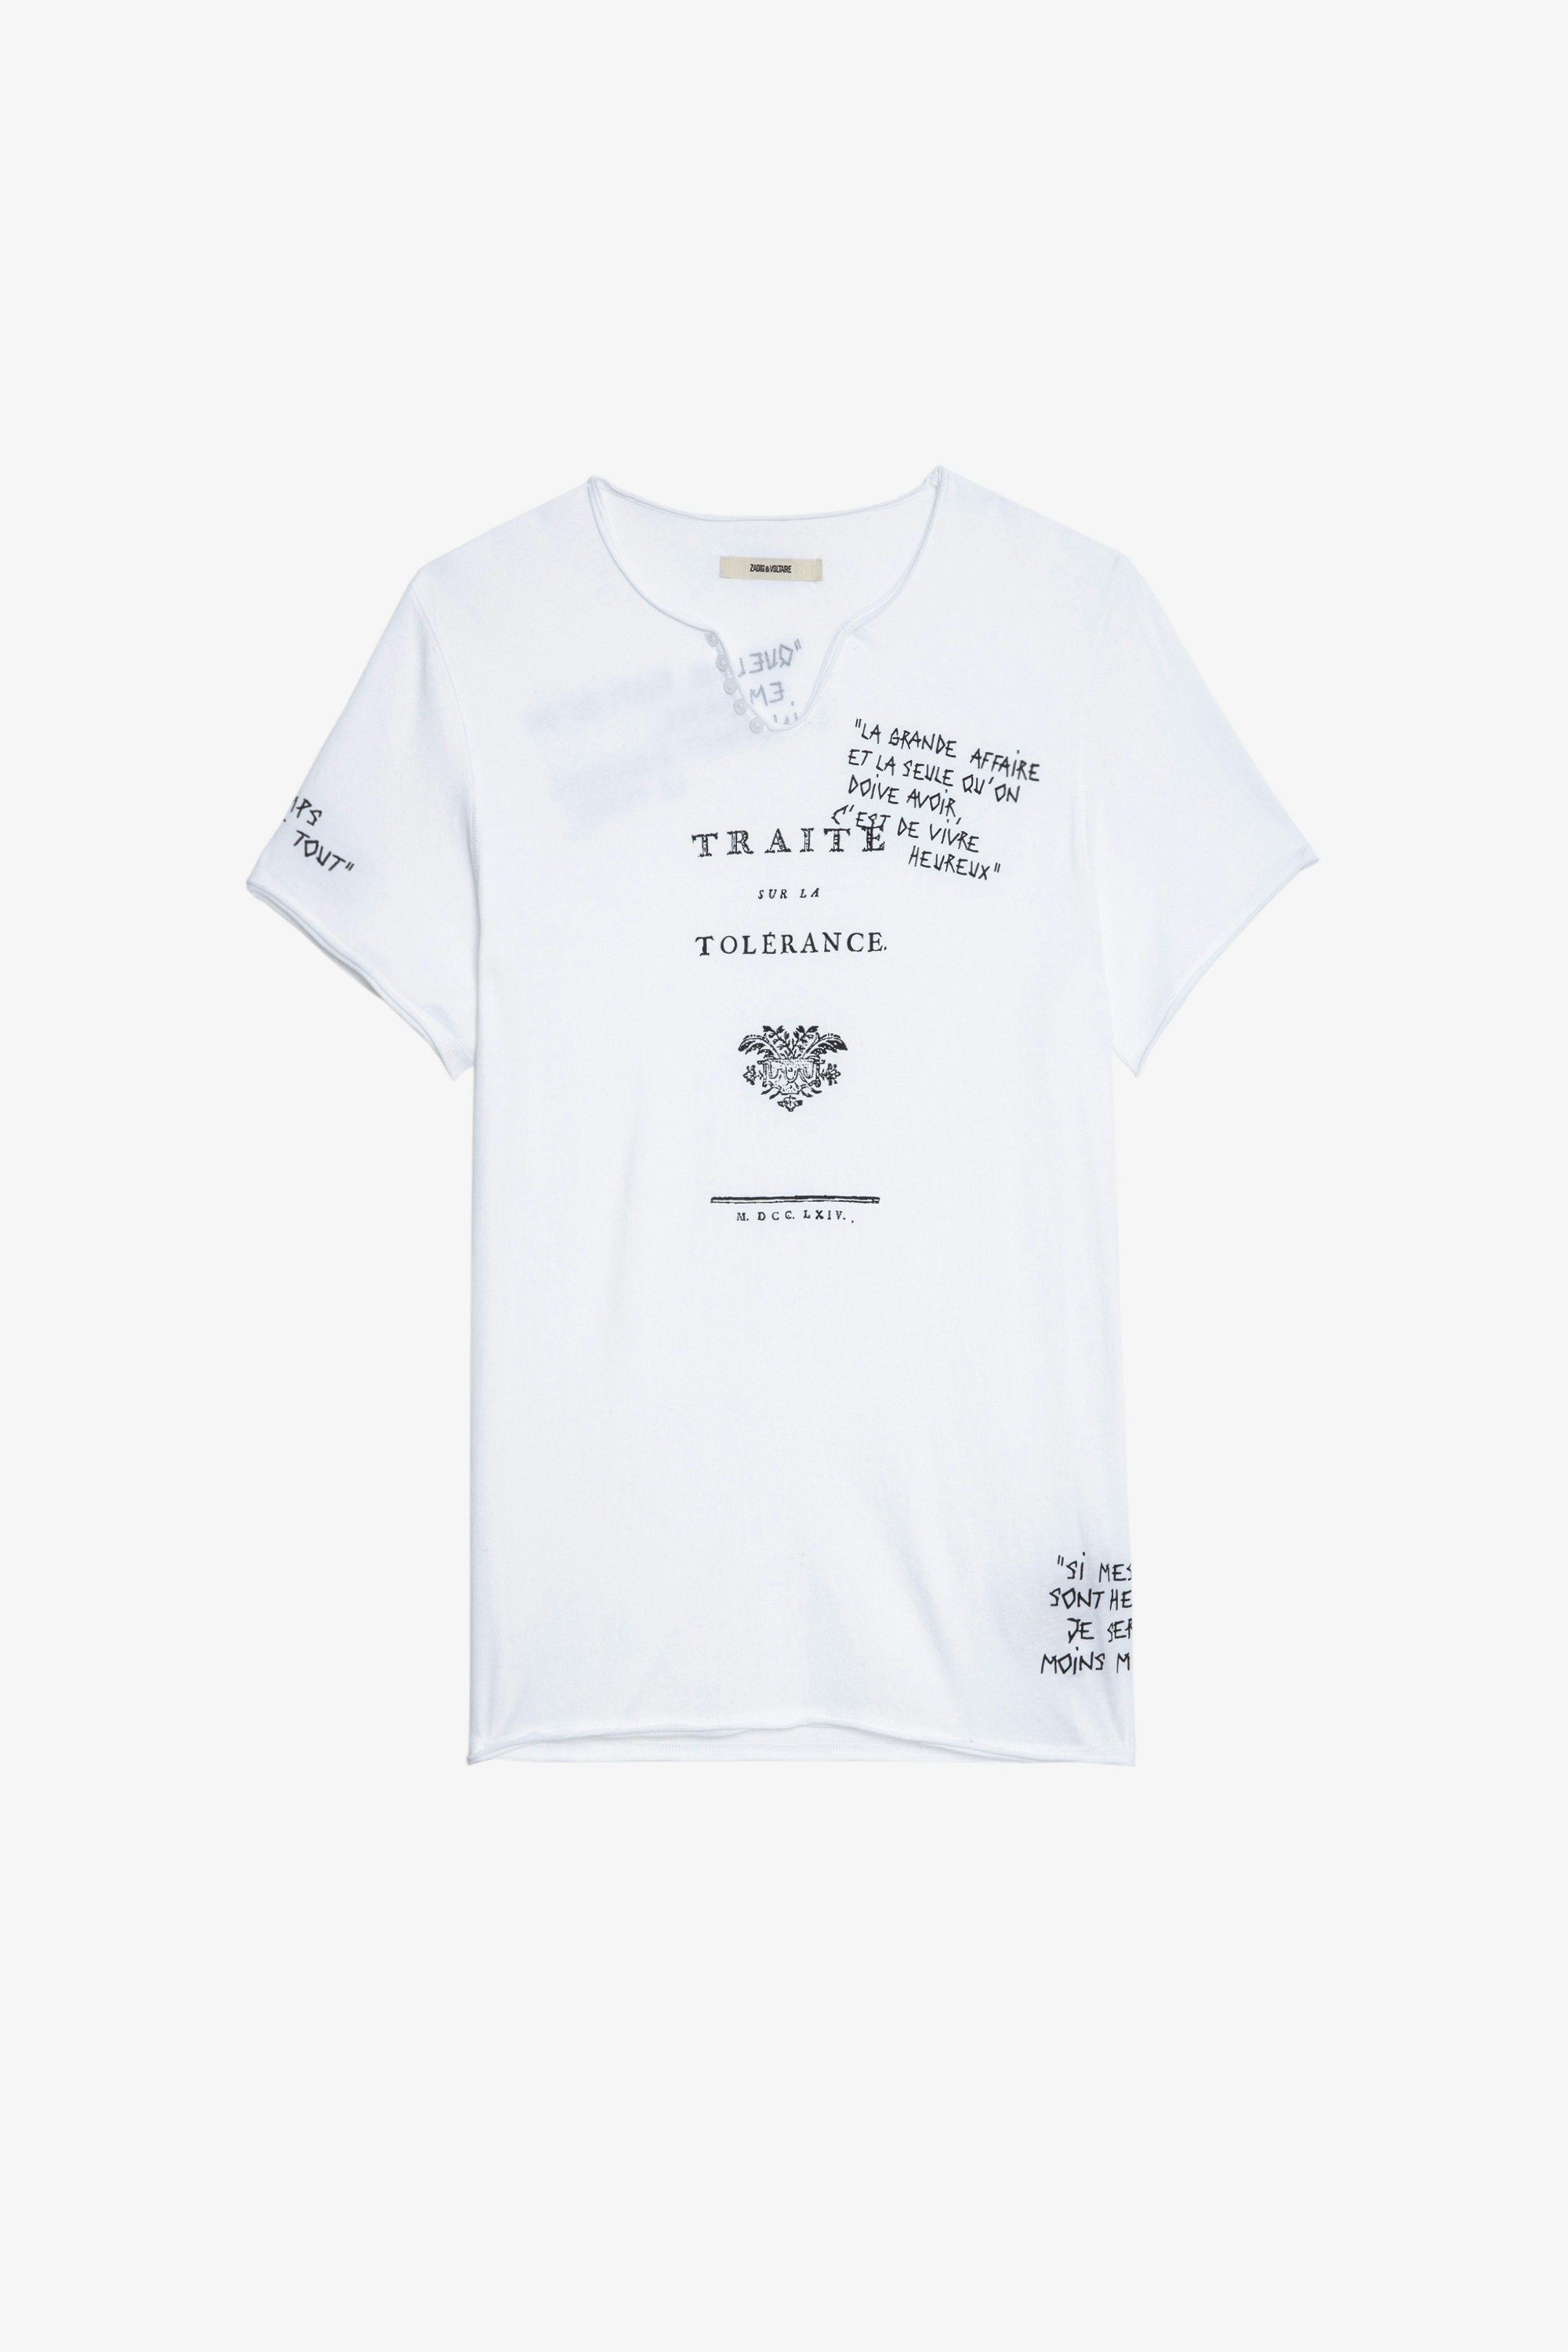 Mens T-shirts Zadig & Voltaire T-shirts Zadig & Voltaire Cotton Monastir T-shirt in White for Men 